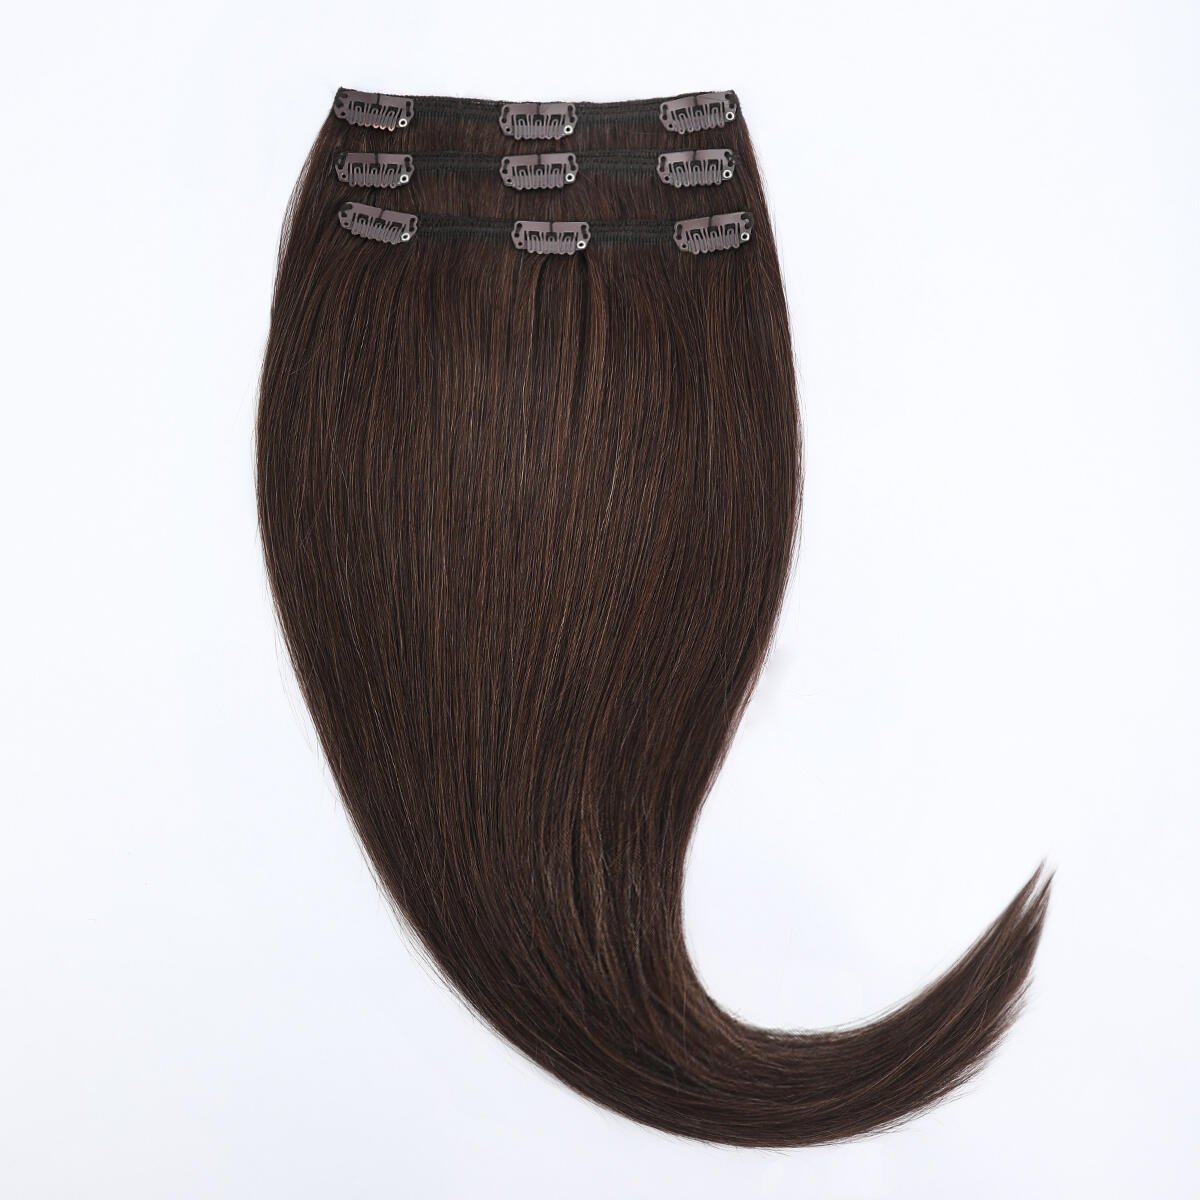 Clip-on set 3 pieces 2.3 Chocolate Brown 30 cm